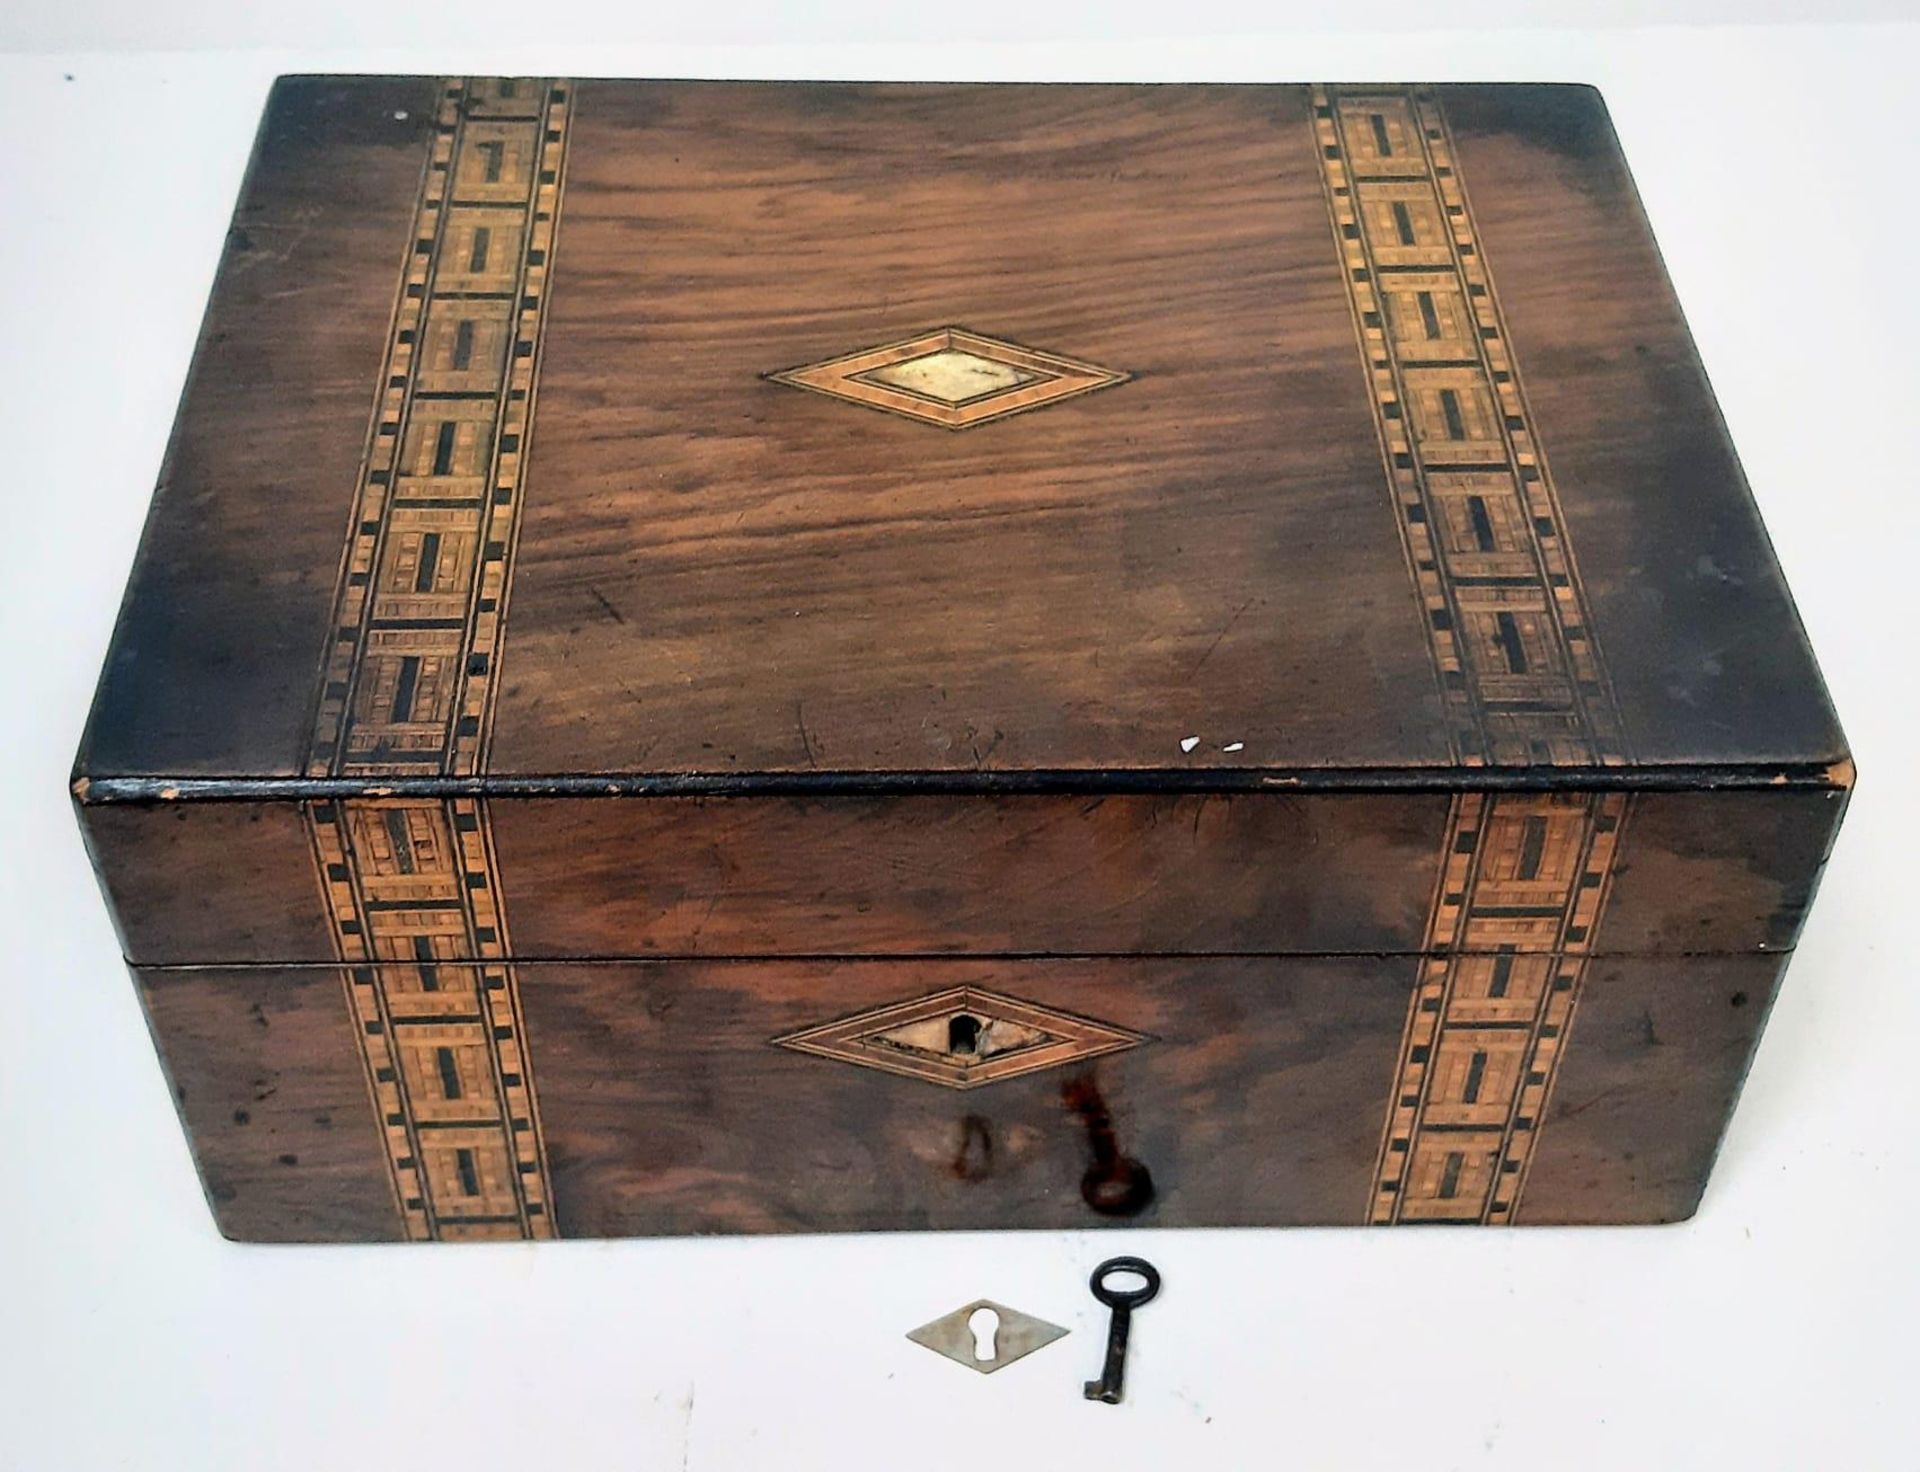 A BEAUTIFULLY INLAID WOODEN BOX 30 X 21 X 13cms WITH MOTHER OF PEARL INLAY TO TOPSIDE. INTERIOR NEED